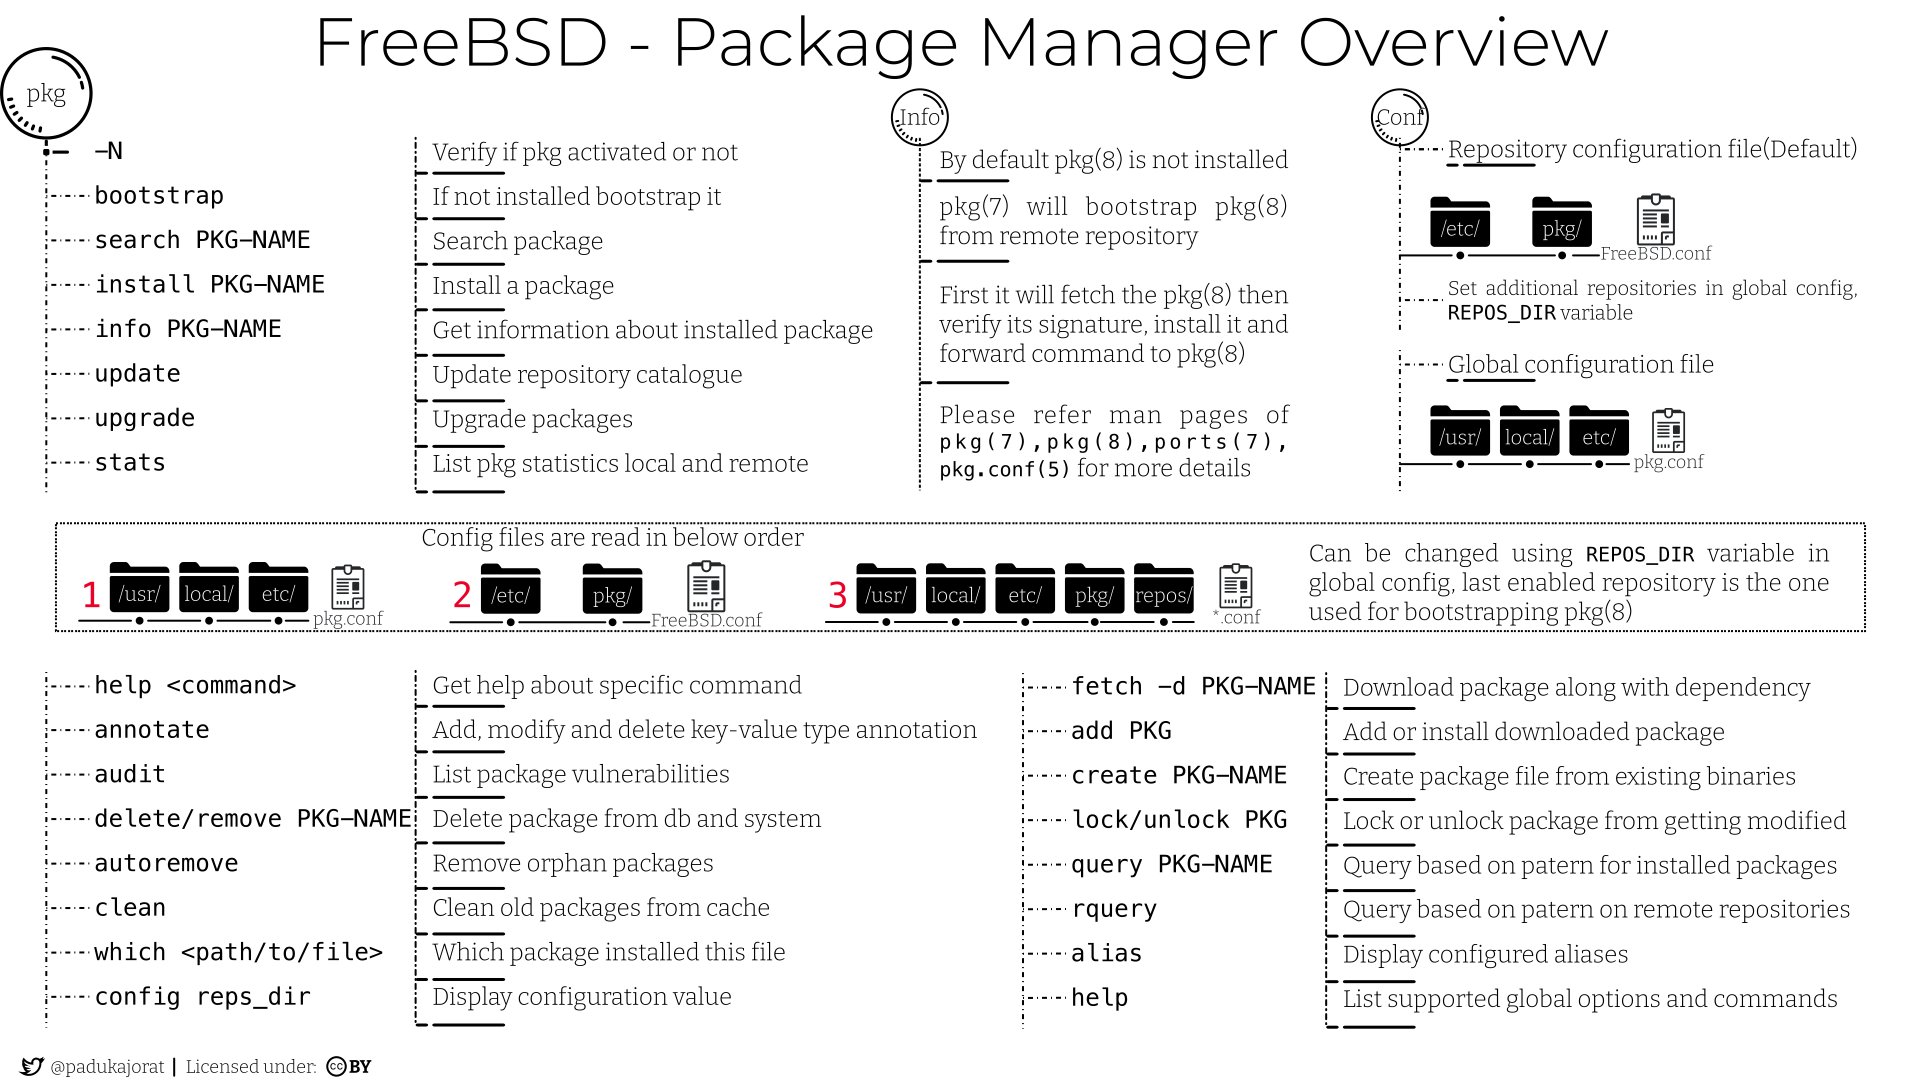 freebsd_package_manager.jpg